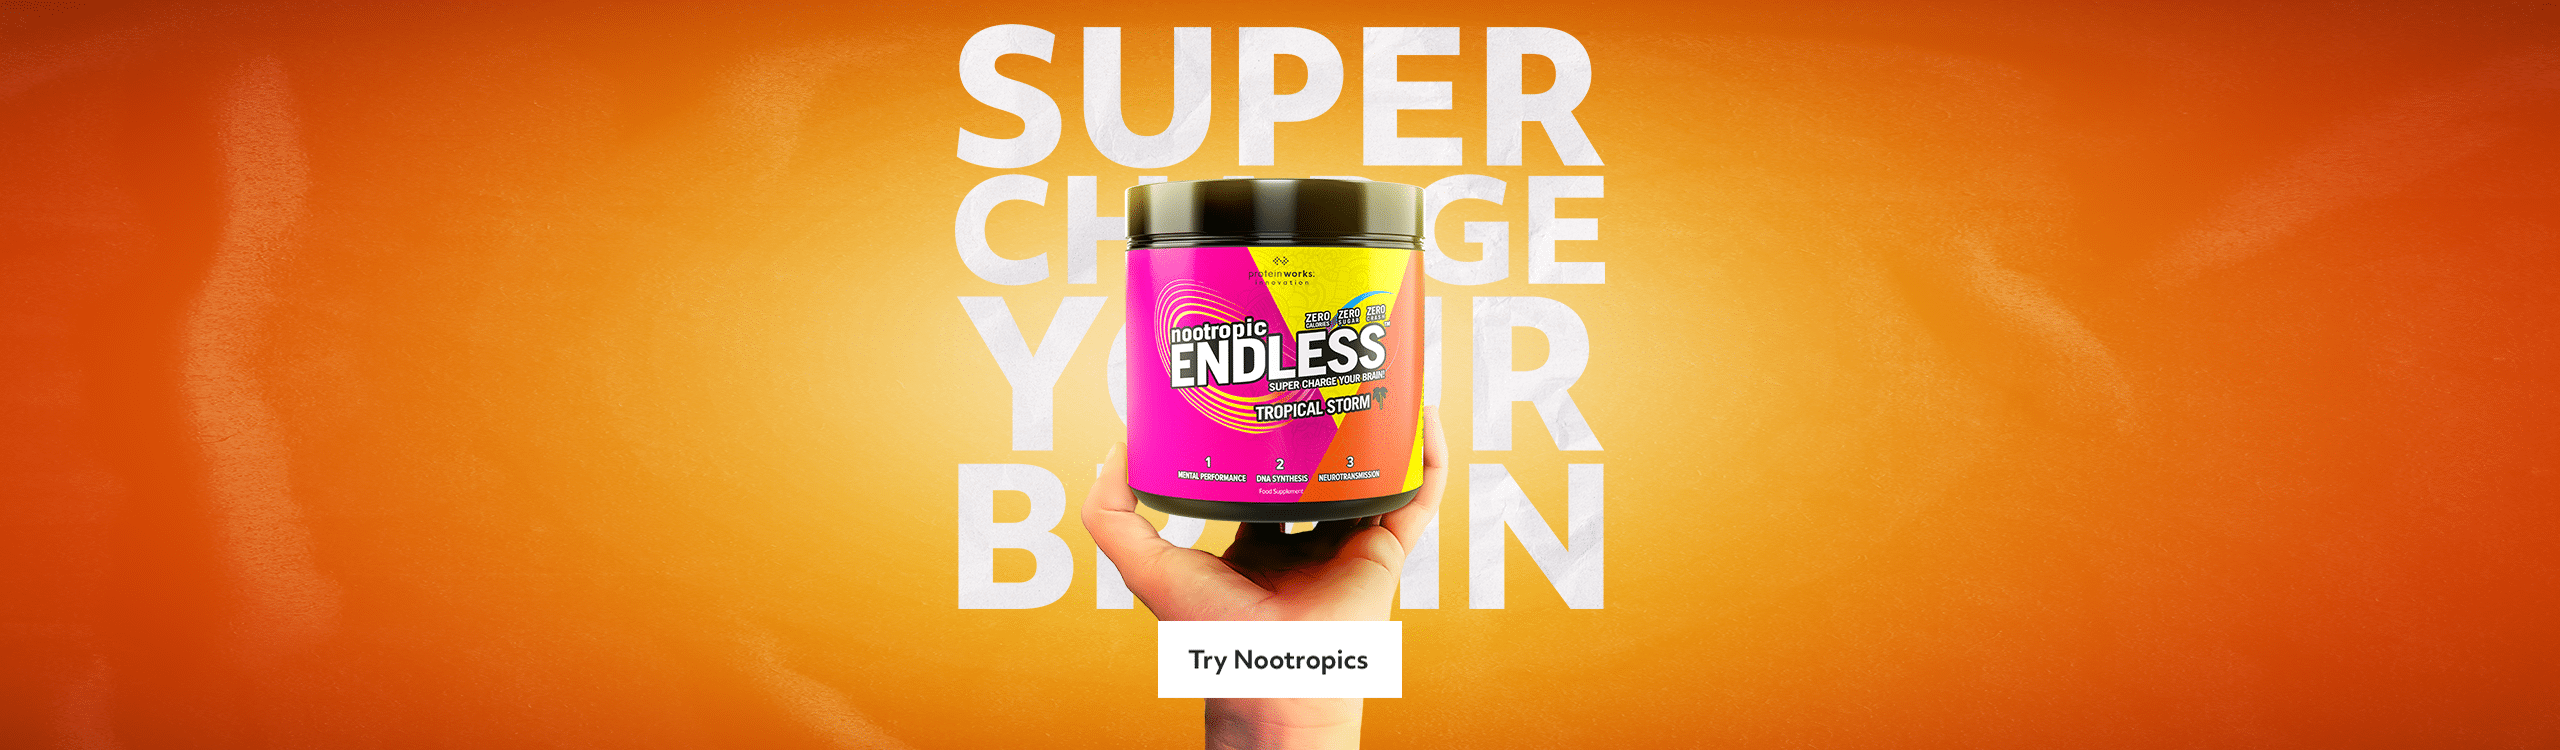 /endless-nootropic